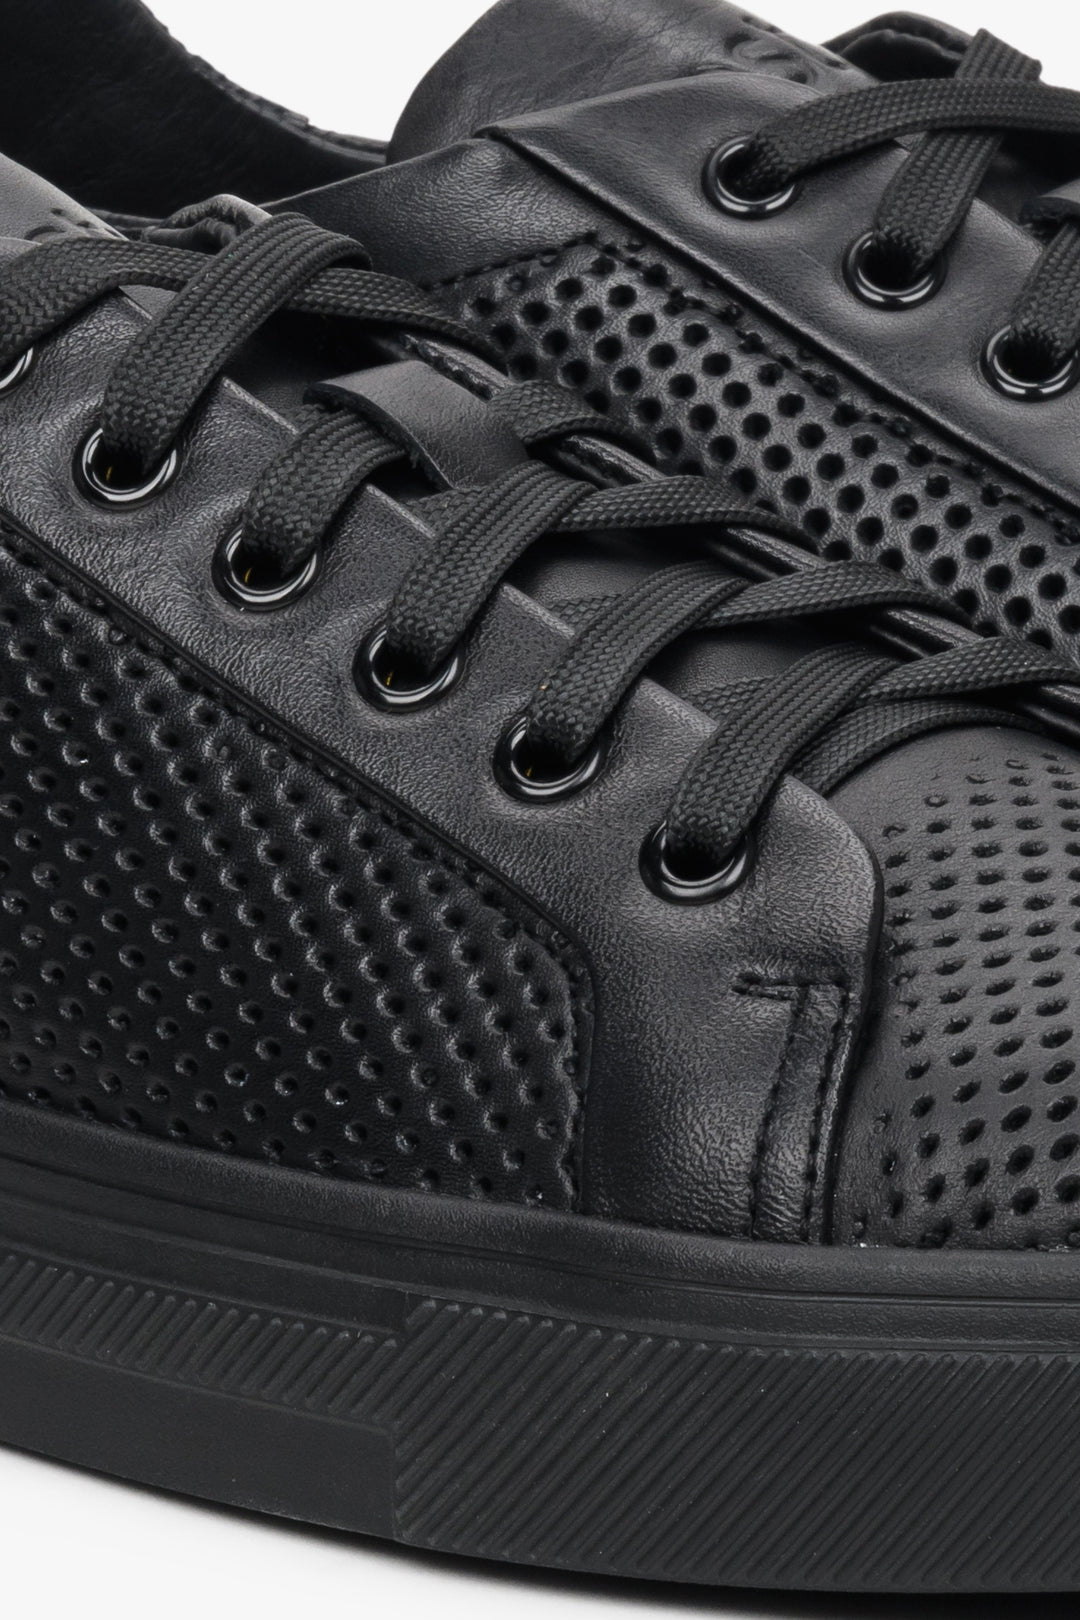 Estro men's black summer sneakers with perforations and laces - close-up on the details.